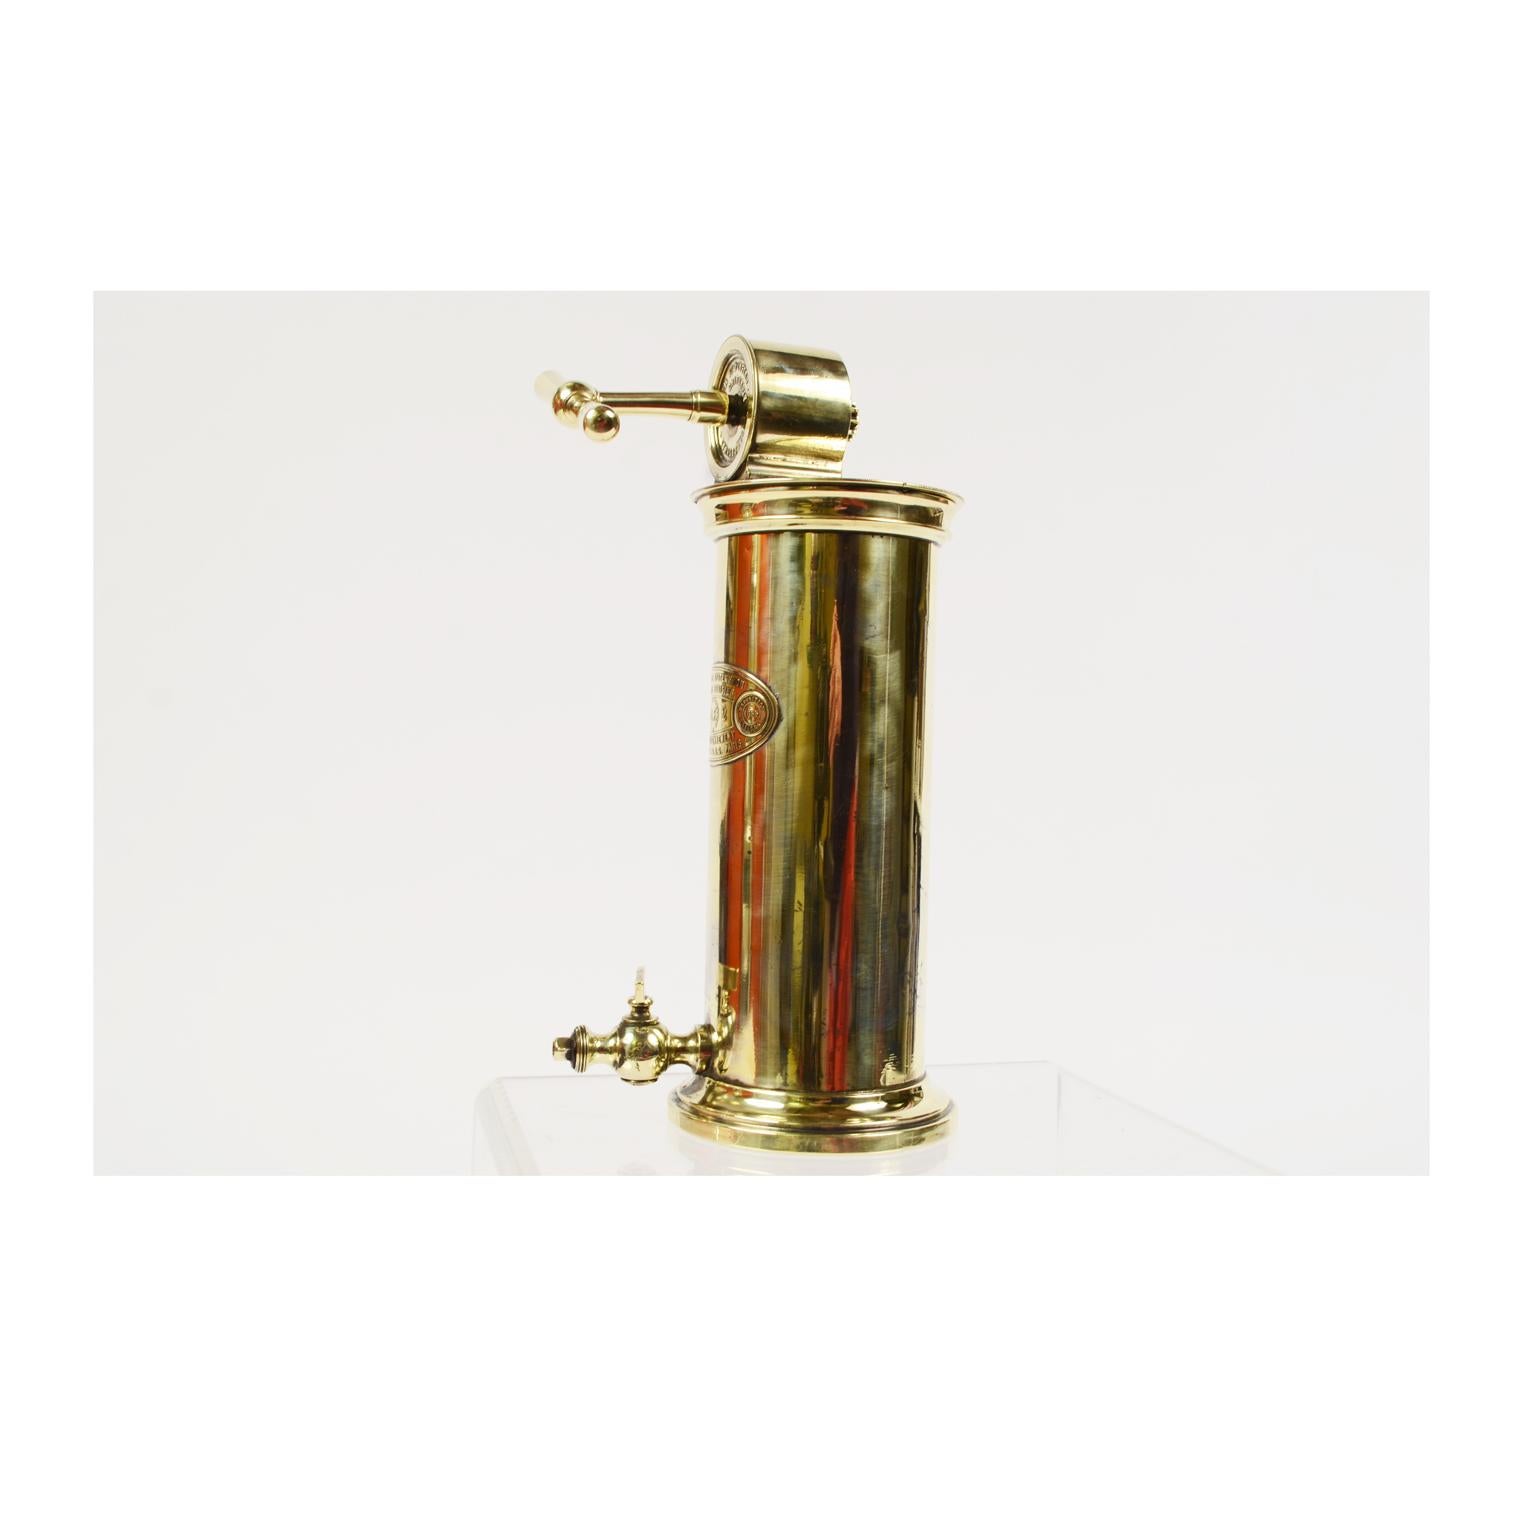 Vaginal irrigator consisting of a cylindrical brass tank in which a piston operated by the loading key placed on top moves. Very good condition. Measures: Height 22.5 cm, diameter 8.5 cm.
A tap is attached to the base of the device on which it is